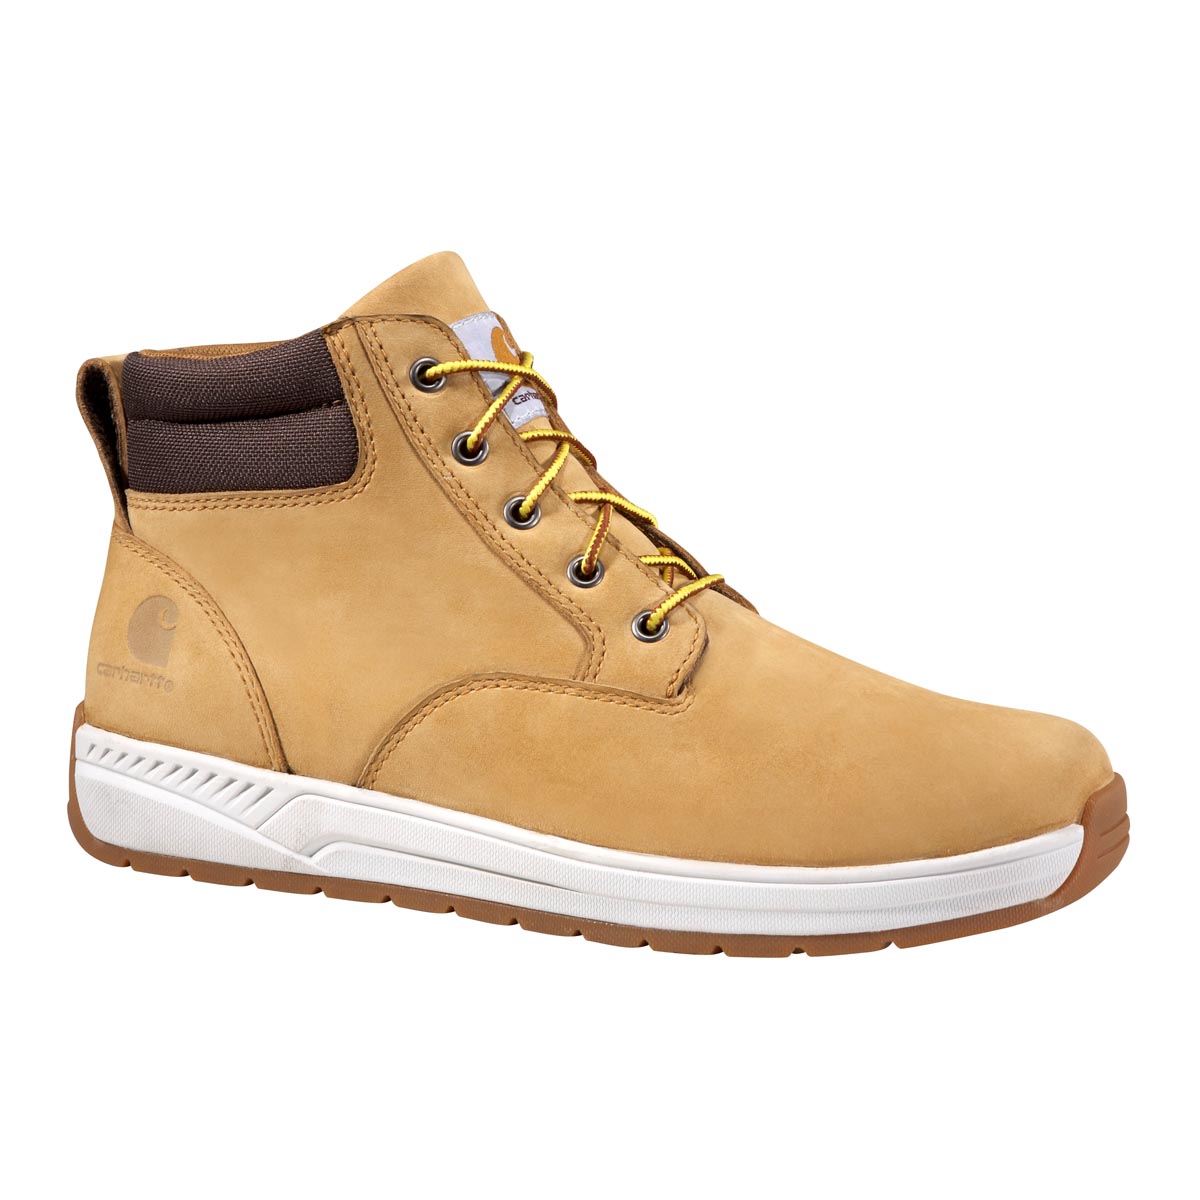 Carhartt Mens 4 Inch Lightweight Wedge Boot Non Safety Toe Wheat